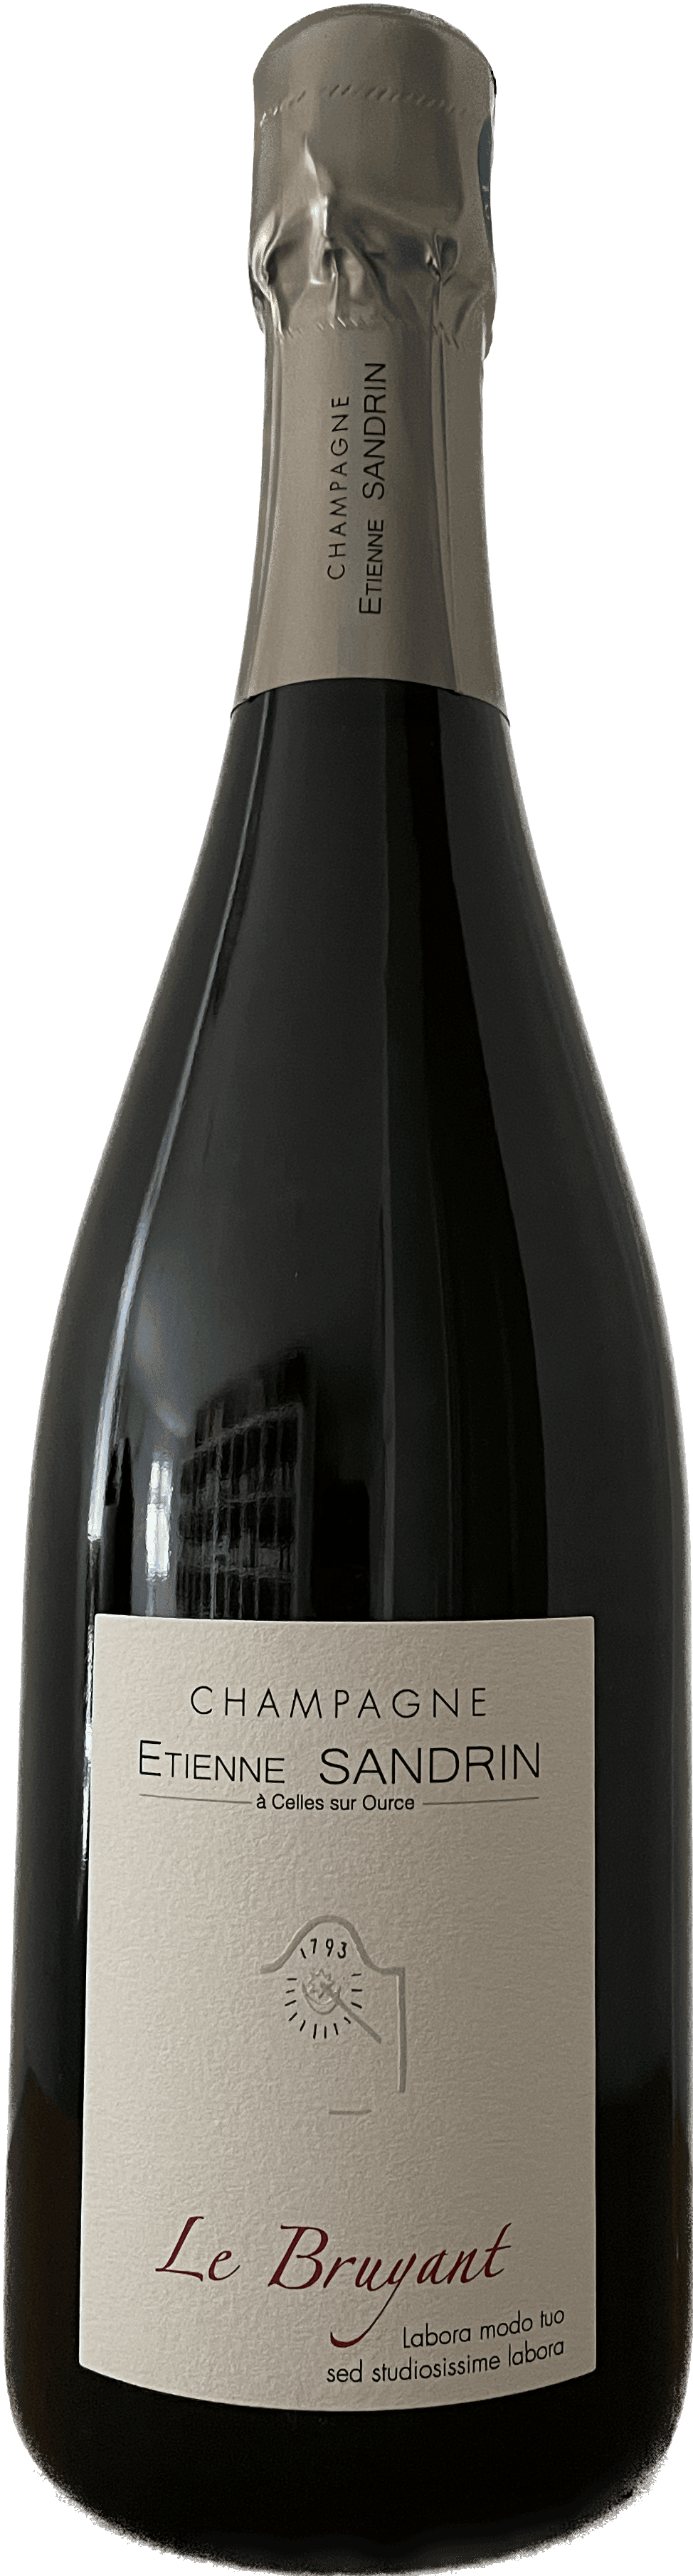  Champagne Etienne Sandrin Le Bruyant 2019